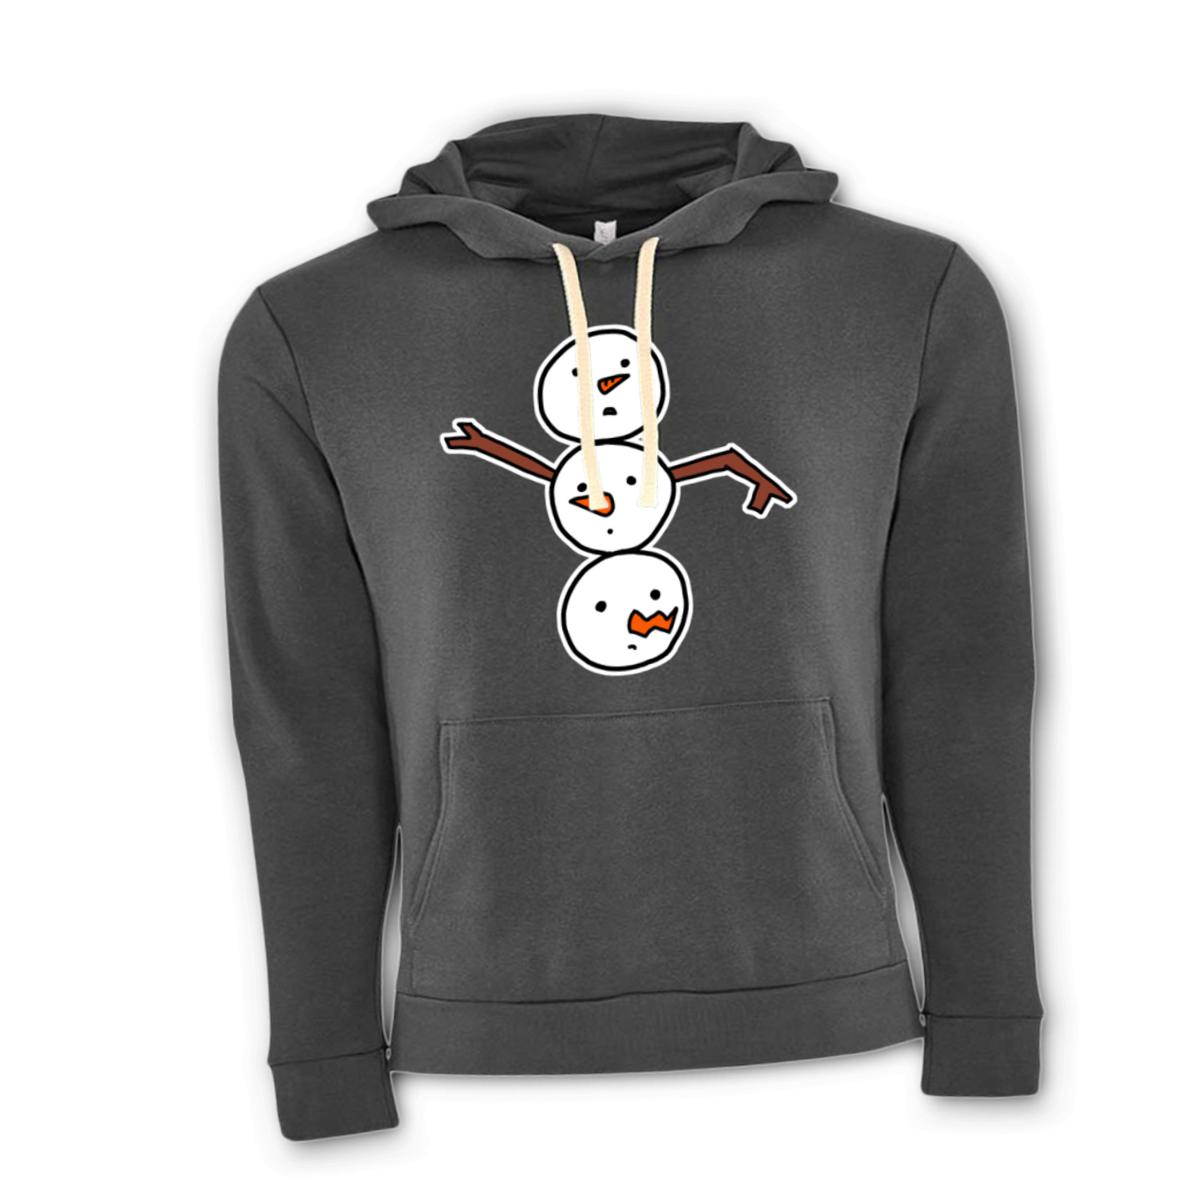 Snowman All Heads Unisex Pullover Hoodie Small heavy-metal